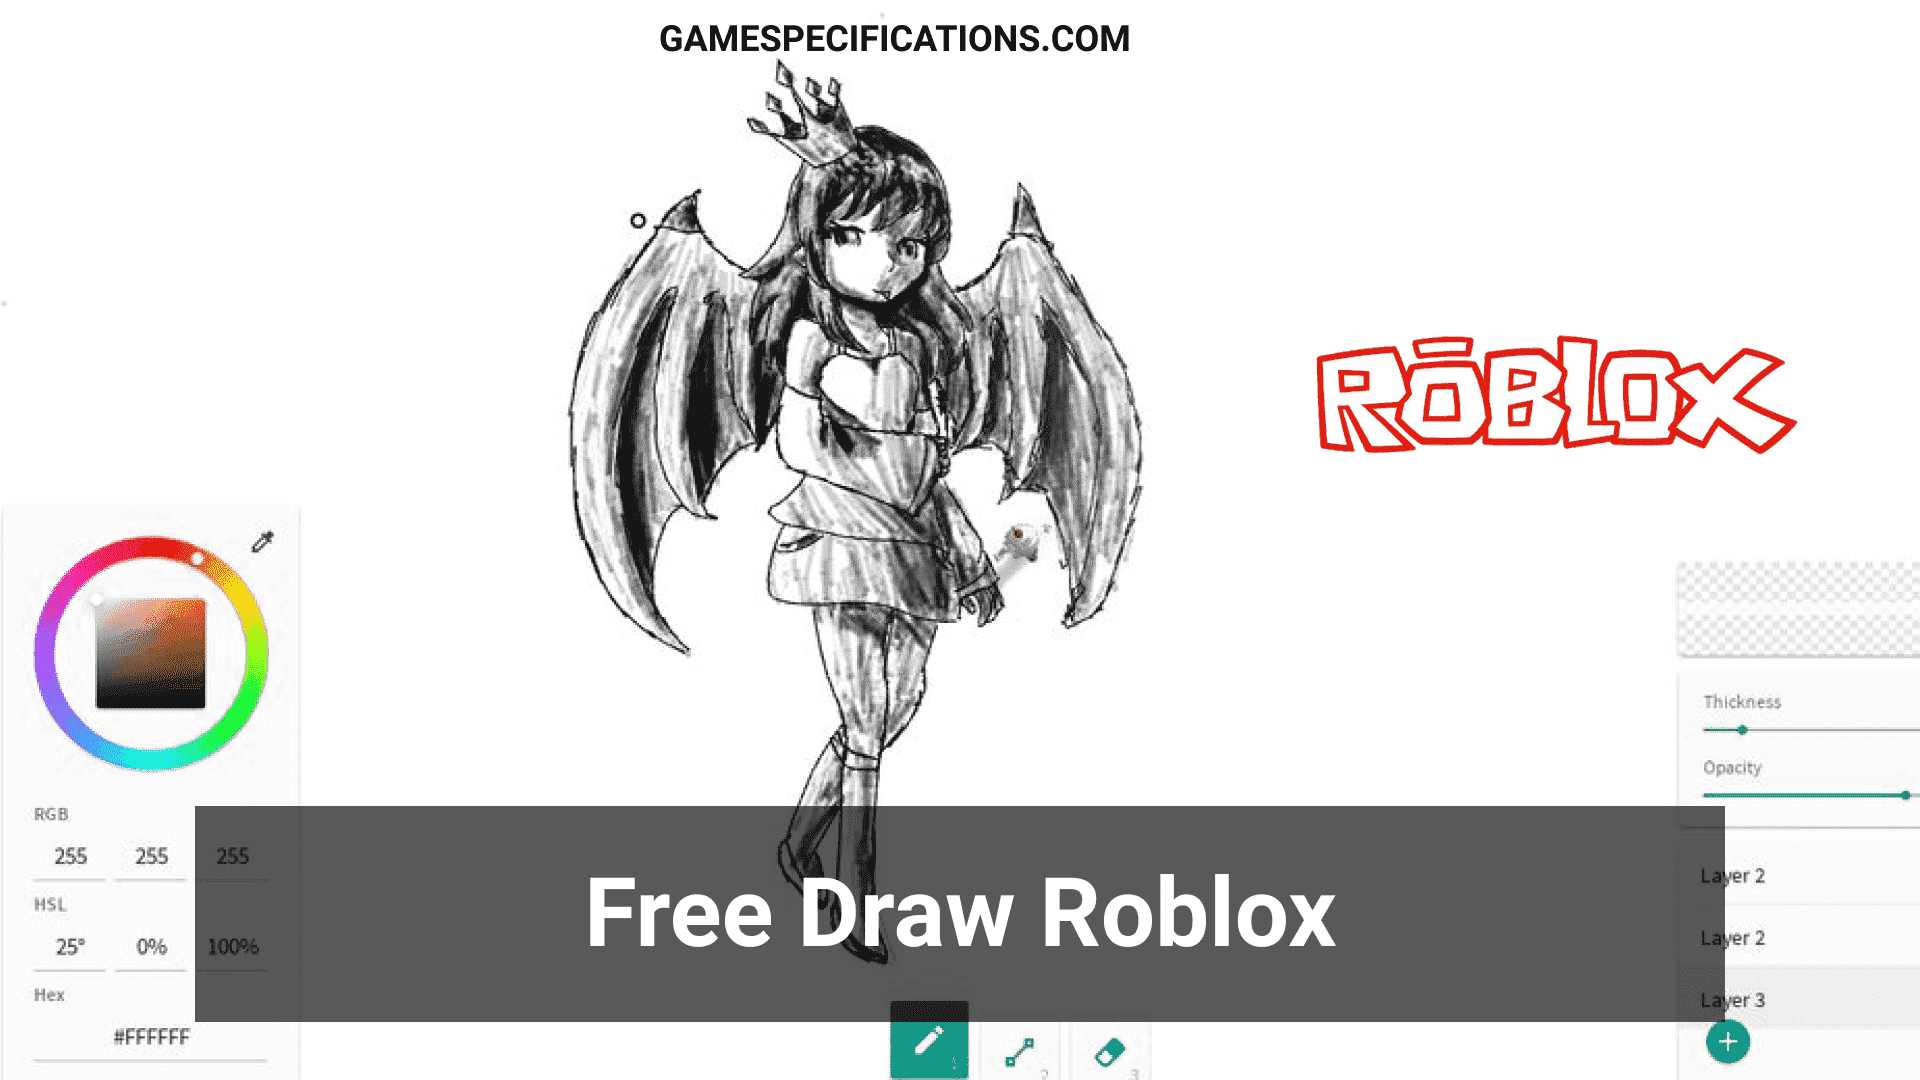 Free Draw Roblox Is A Creative Game To Express Your Skills Game Specifications - what is the vote to kick command roblox